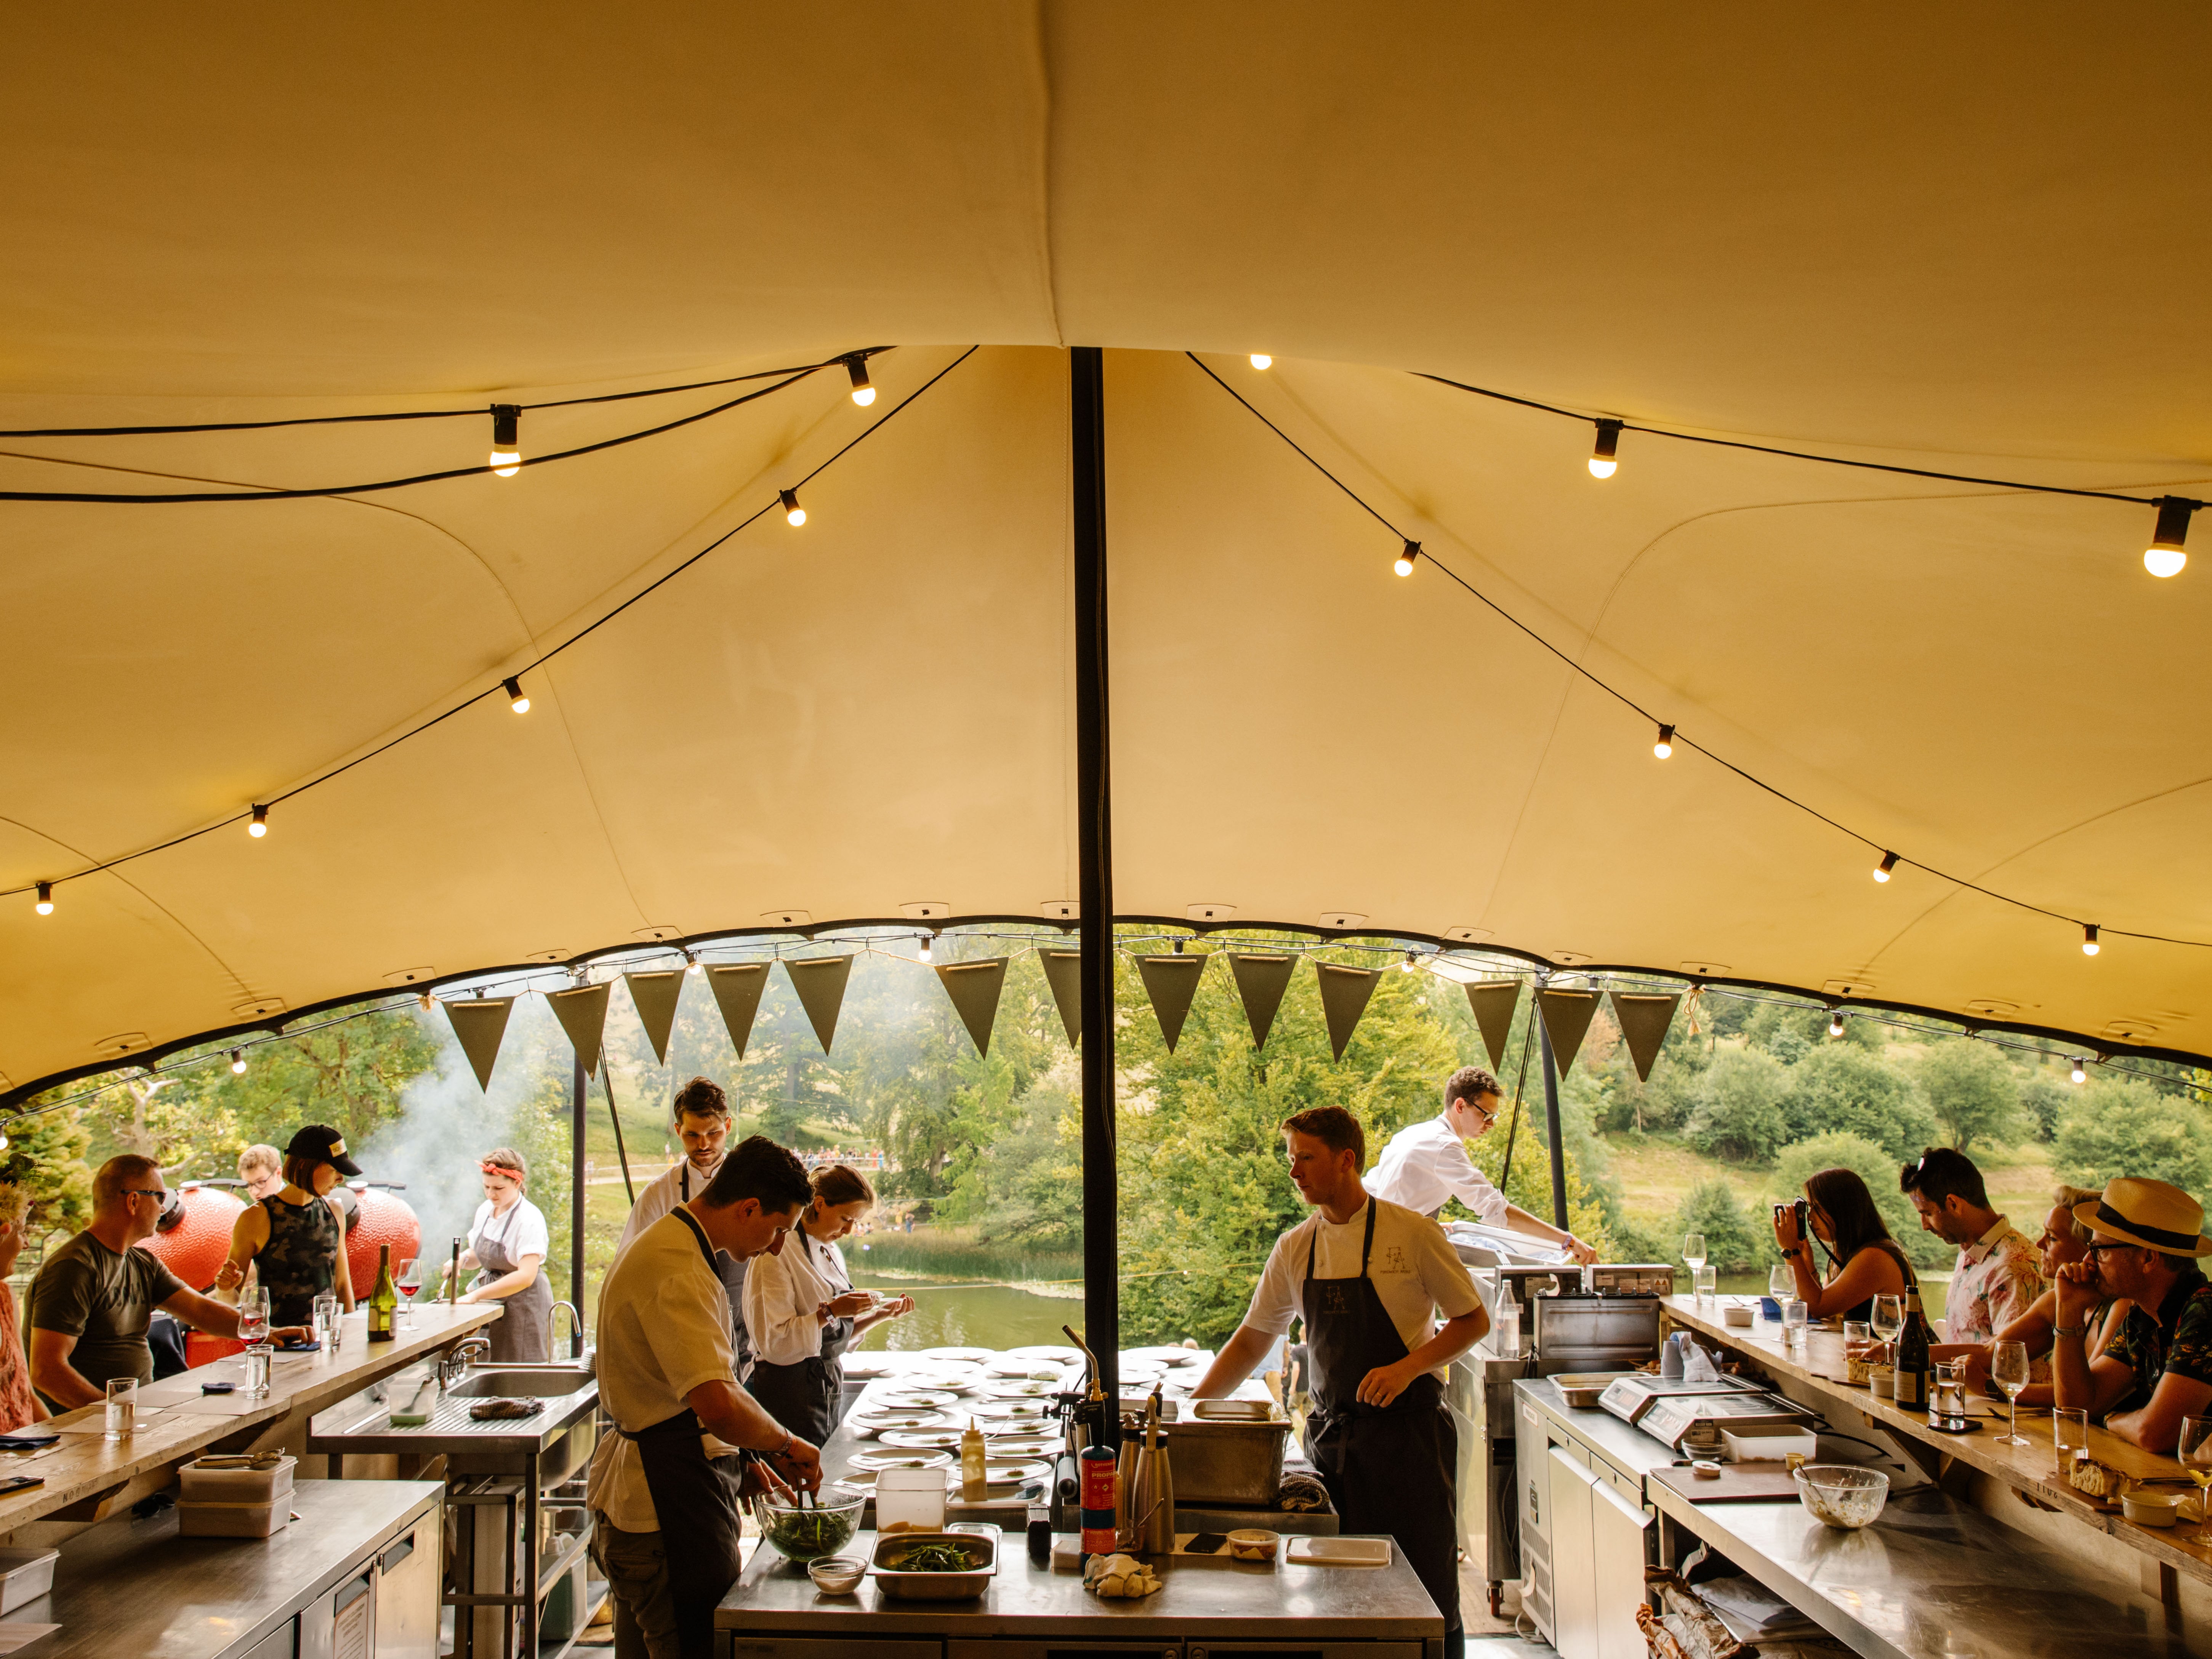 Diners enjoy a gourmet experience at Wilderness Festival